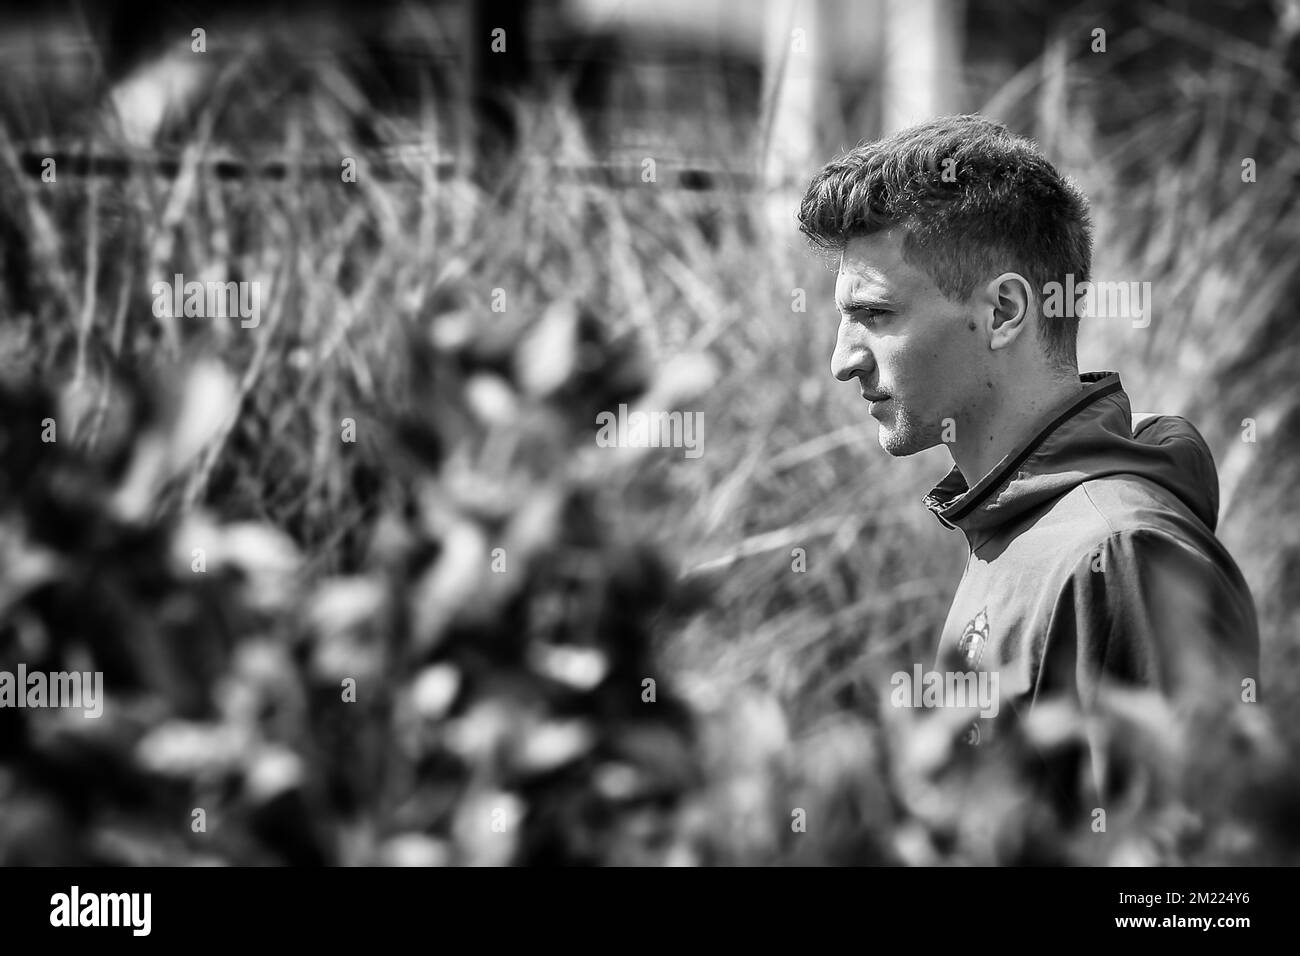 Belgium's Thomas Meunier arrives for a training session of Belgian soccer team Red Devils, during the preparations for the upcoming Euro 2016 UEFA European Championship in France, on Saturday 11 June 2016, in Bordeaux, France. The Euro2016 tournament is taking place from 10 June to 10 July. BELGA PHOTO BRUNO FAHY Stock Photo